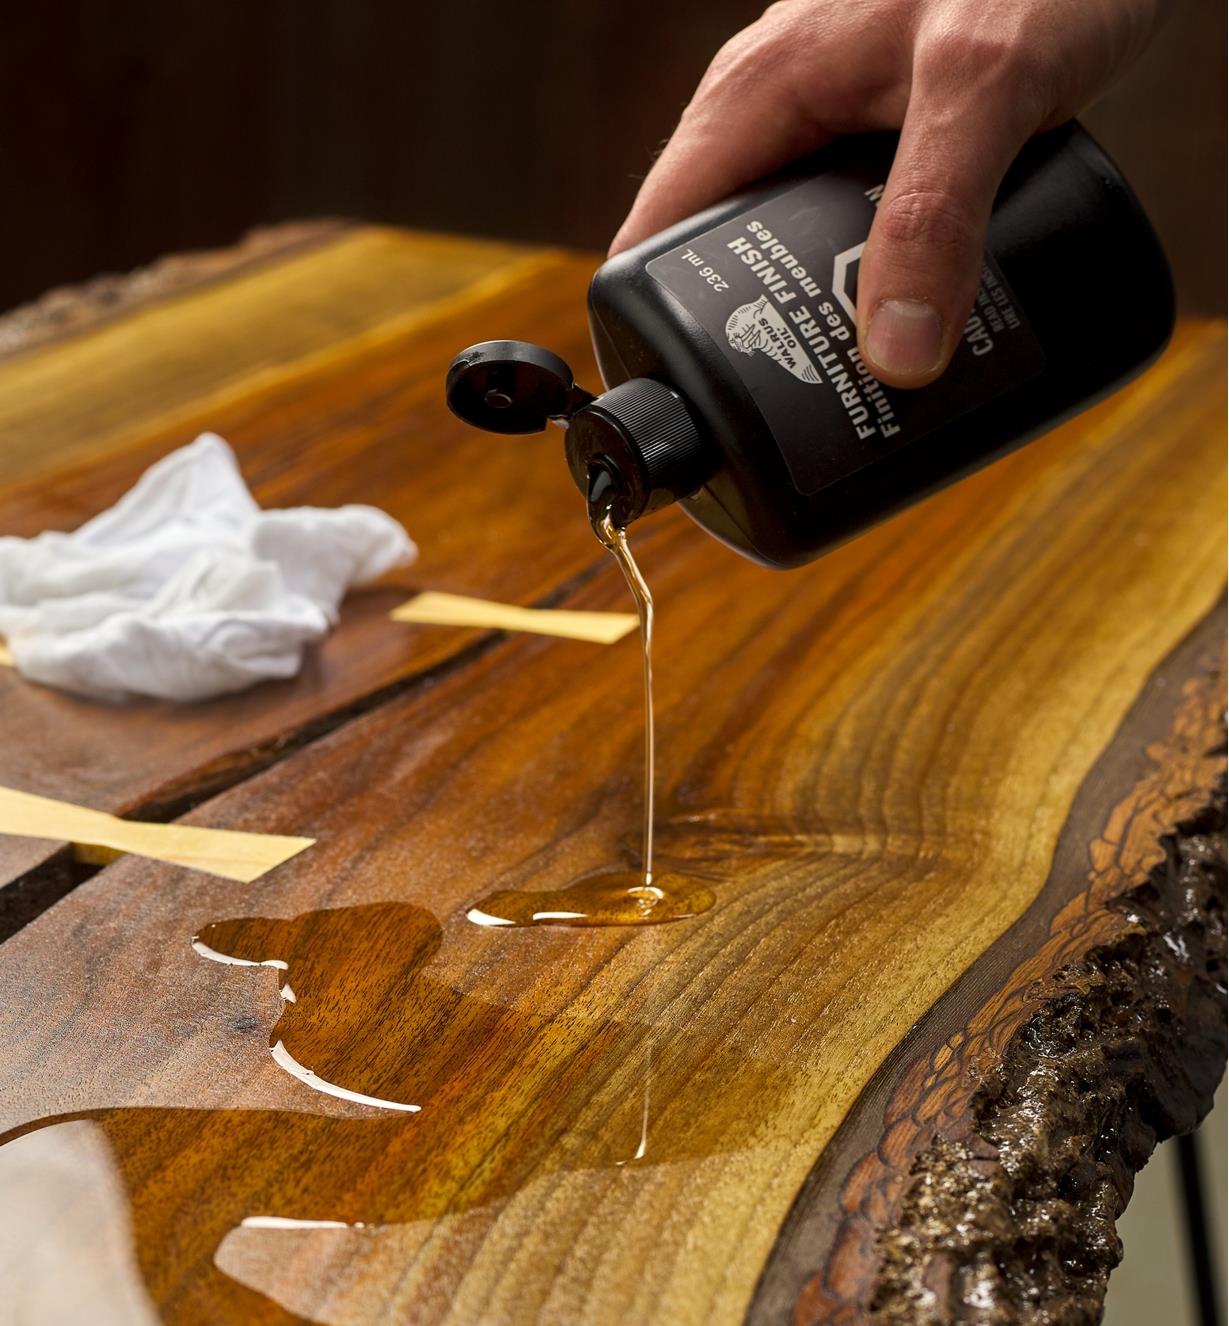 Applying a thin layer of Walrus Oil furniture finish to a table top